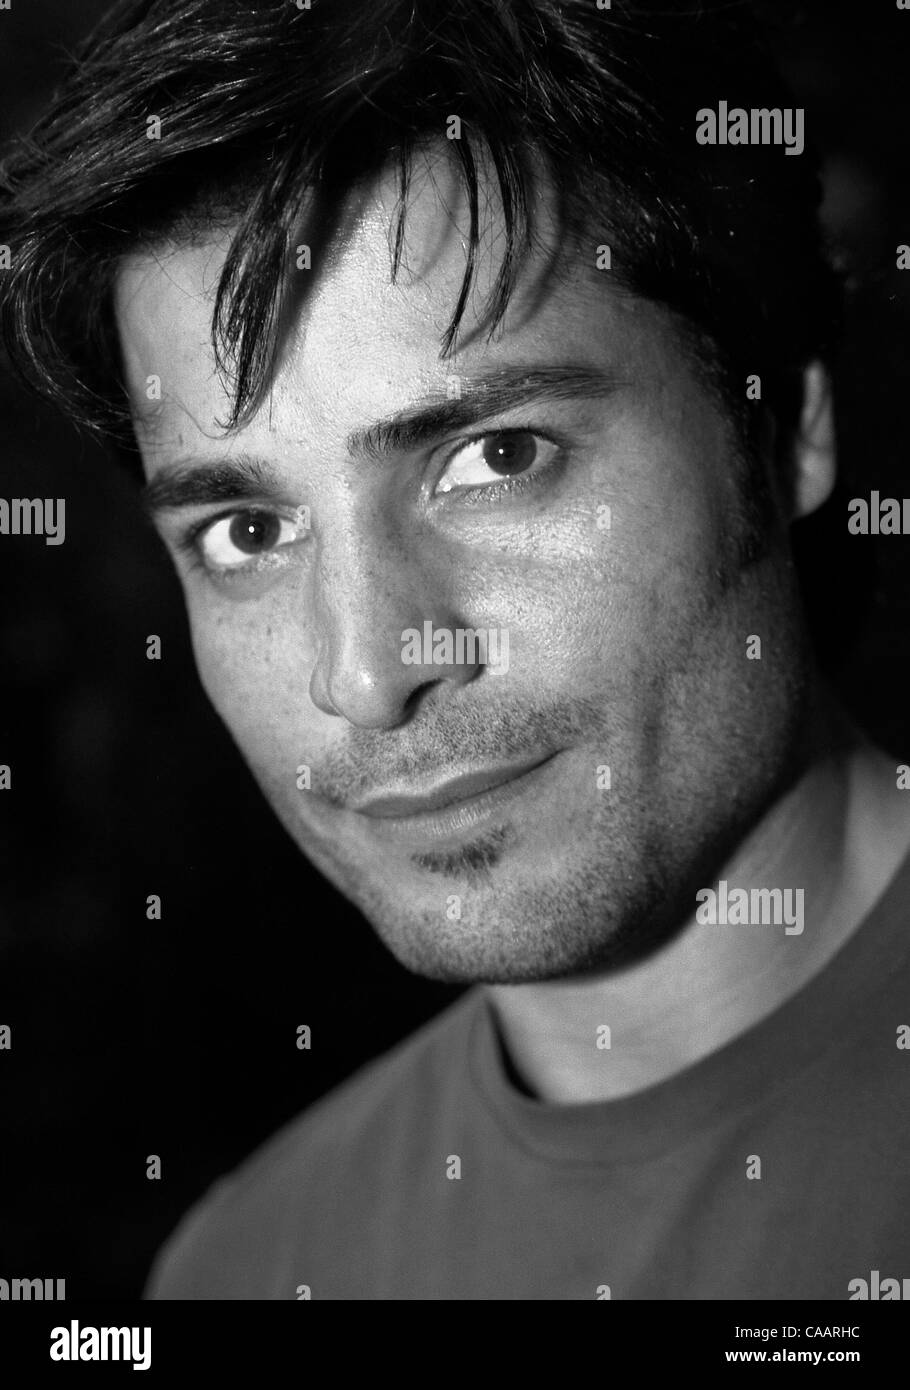 Feb 01, 2004 - Miami, FL, USA - CHAYANNE is a Grammy Award and Latin Grammy Award-nominated Puerto Rican pop singer who was born as Elmer Figueroa-Arce in San Lorenzo, Puerto Rico. Chayanne is one of Puerto Rico's most successful pop stars, selling over 10 million records worldwide, and having 9 num Stock Photo